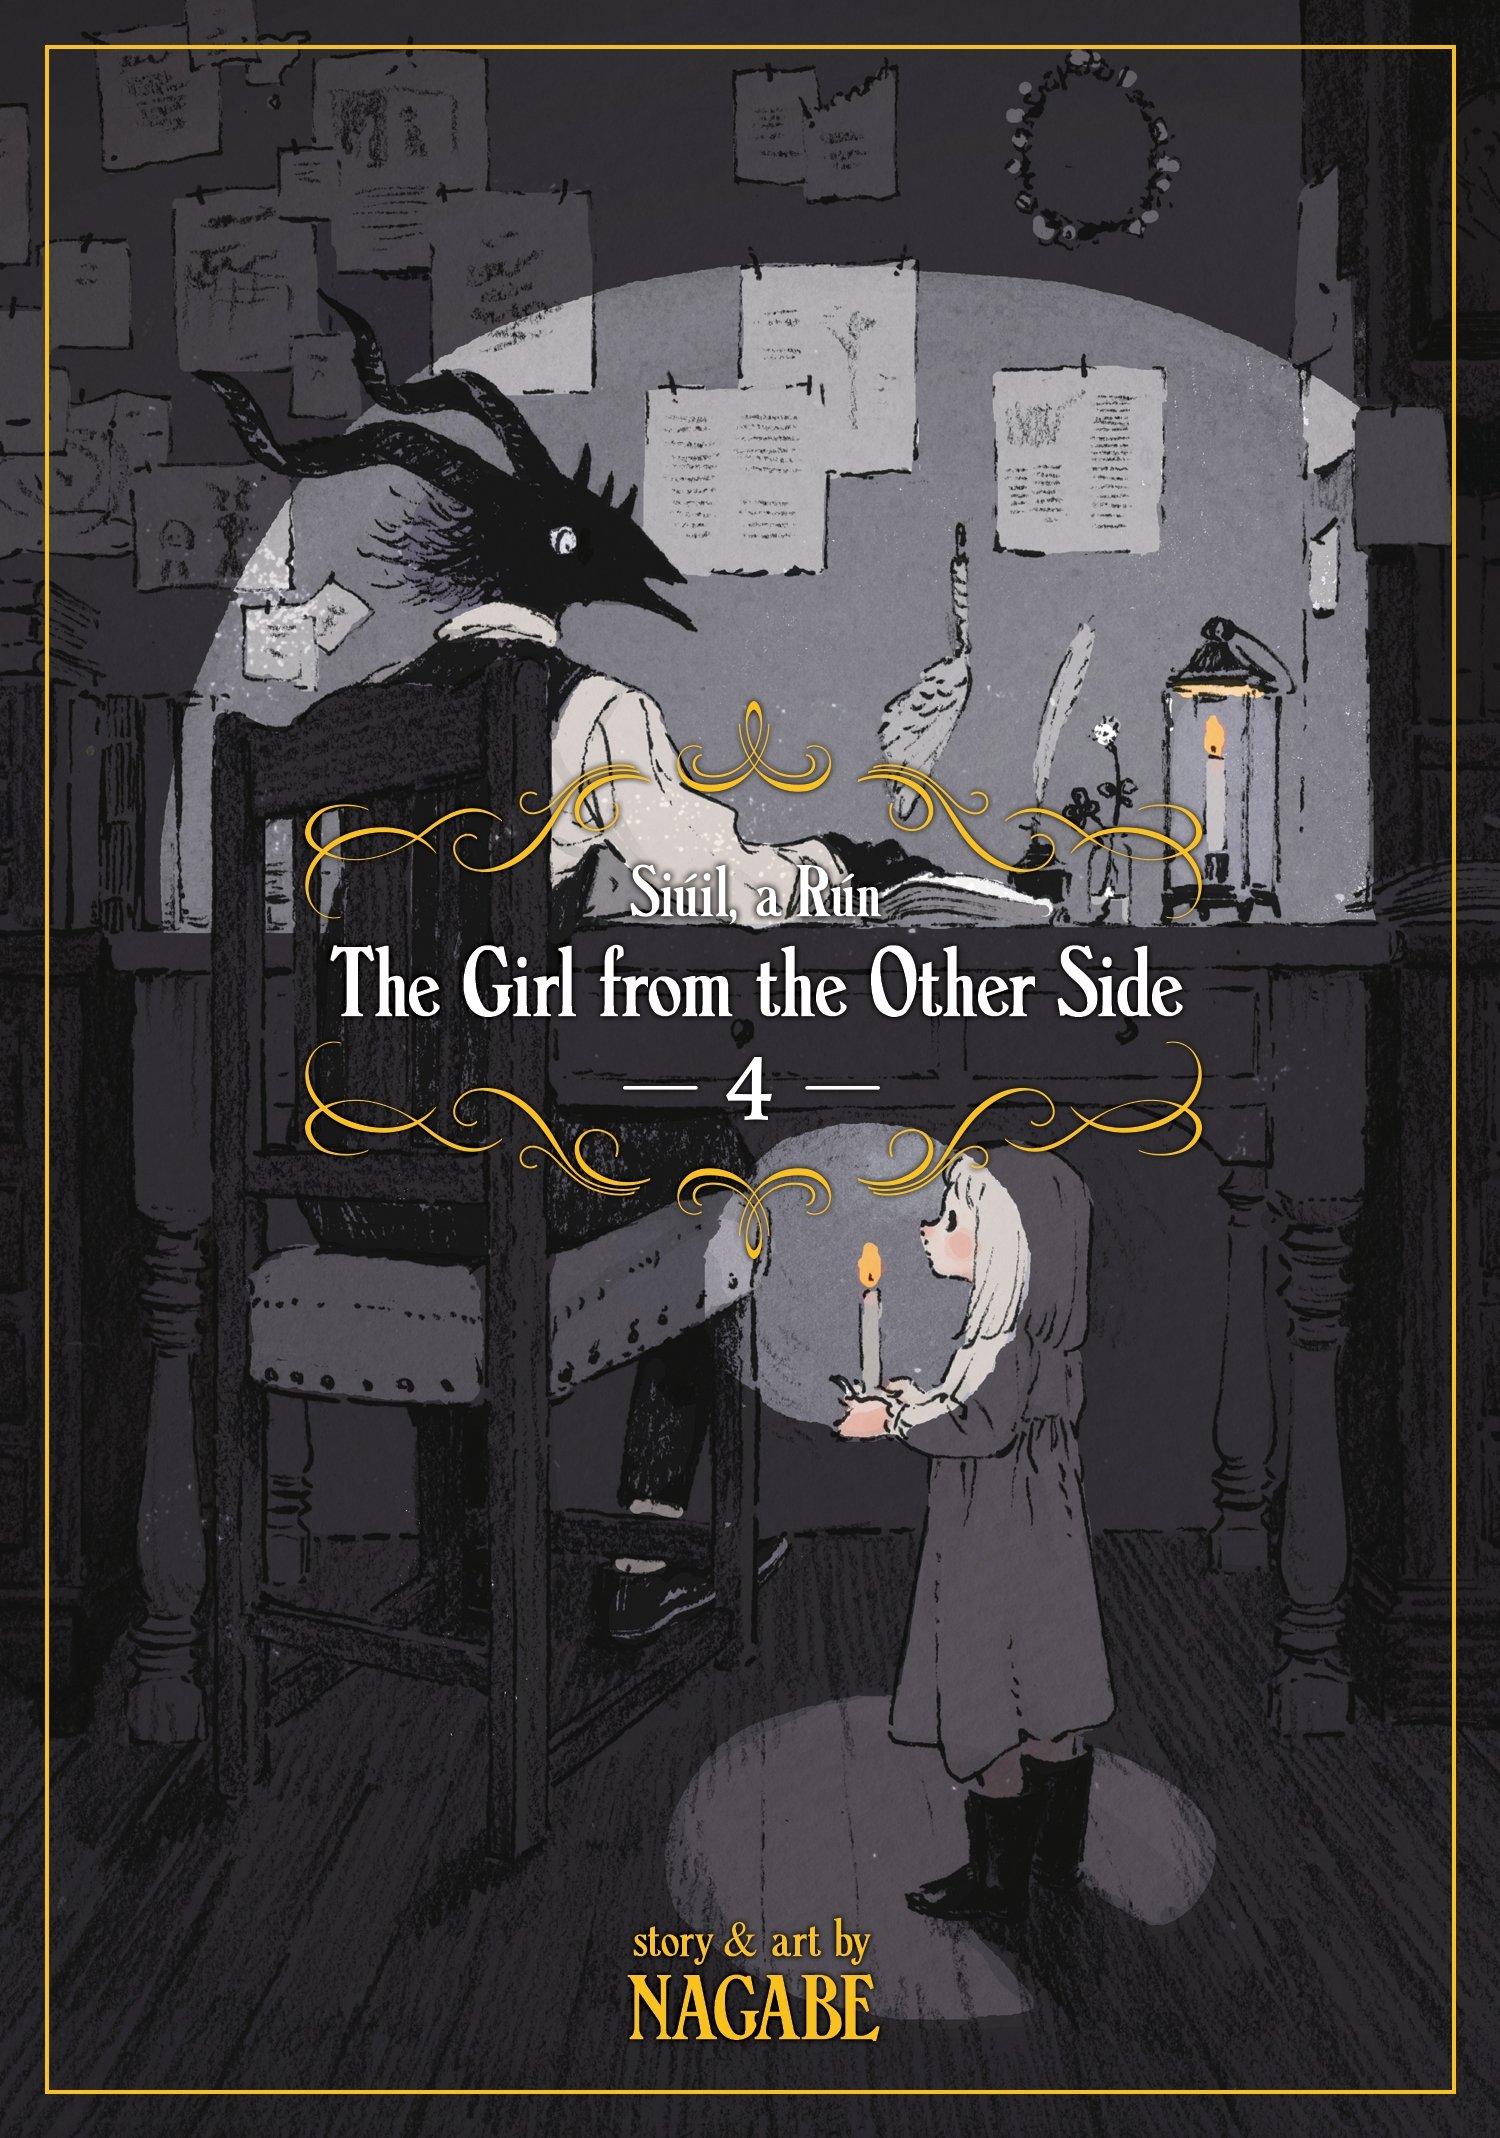 The Girl from the Other Side: Siuil, a Run. Volume 4